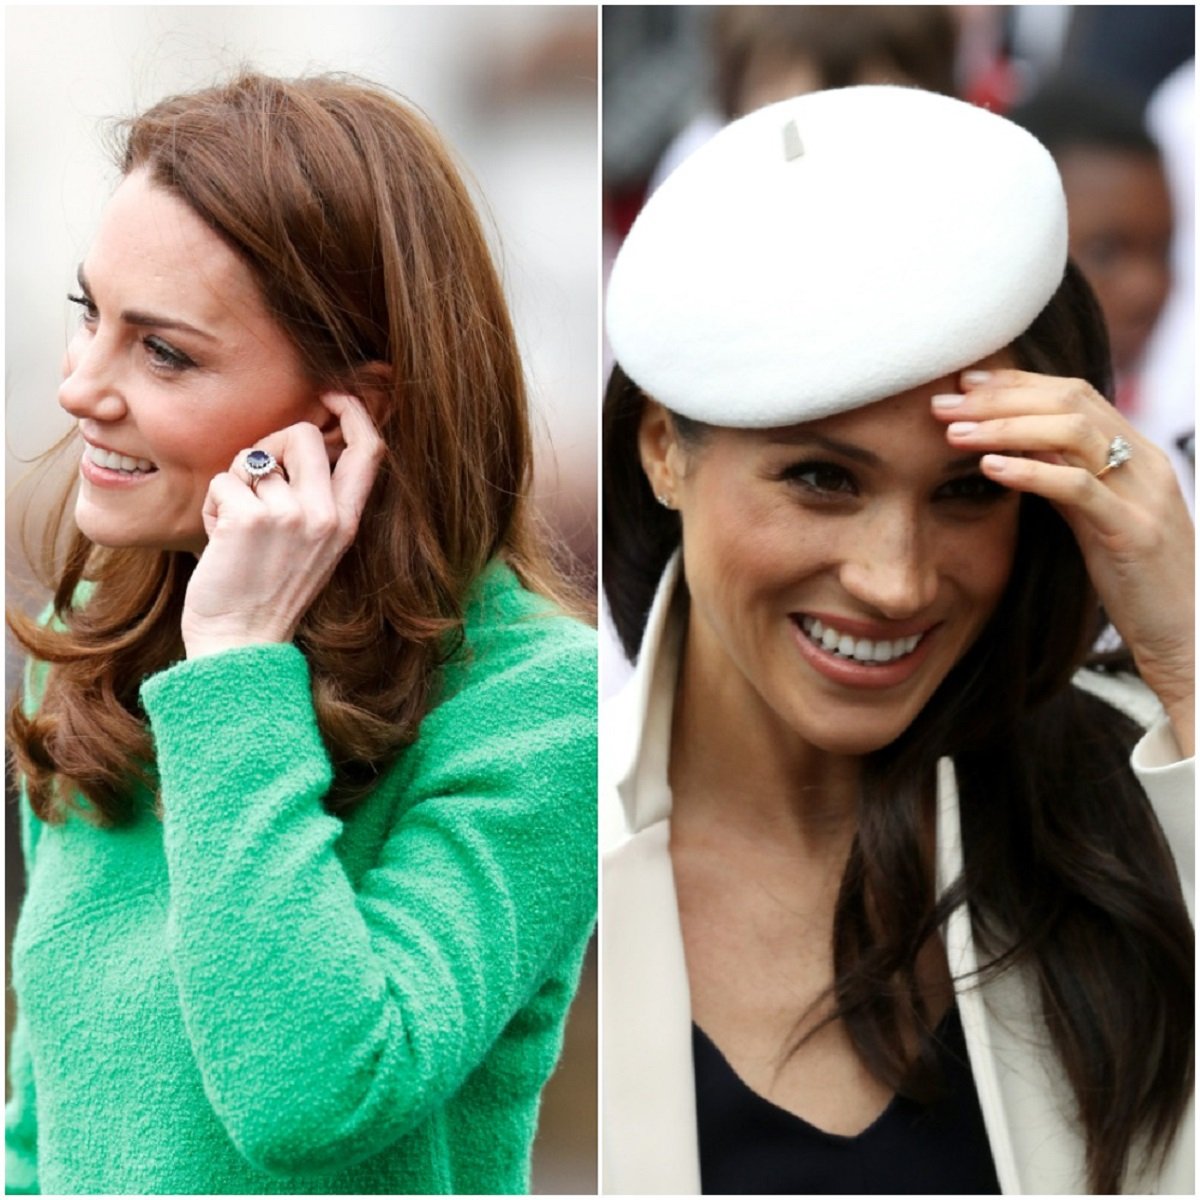 (L) Meghan Markle's engagement ring can be seen as she touches her forehead, (R) Kate Middleton’s engagement ring can be seen as she tucks her hair behind her ear